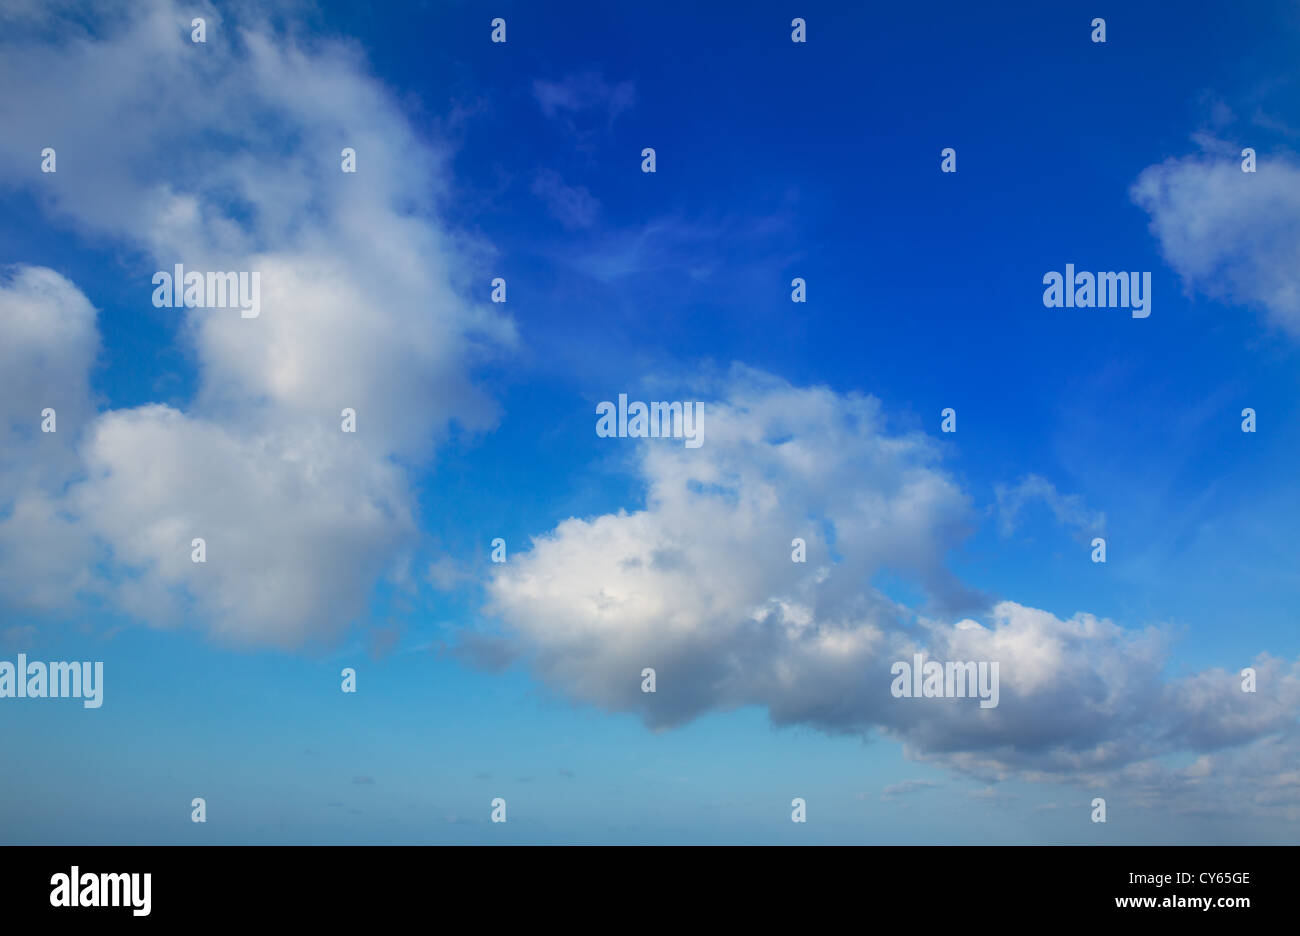 Blue sky with perfec cumulus clouds background Stock Photo